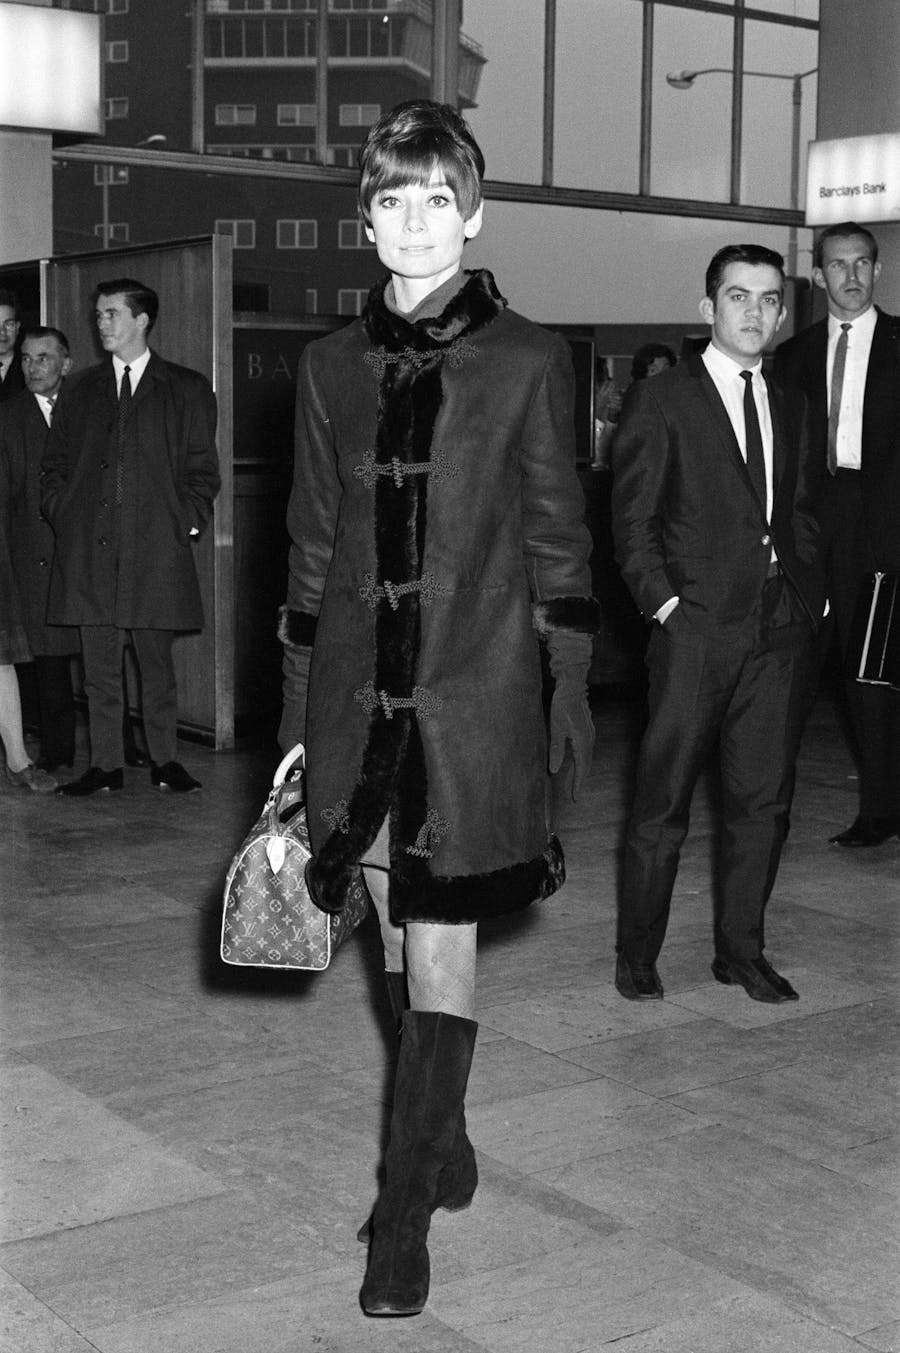 British actress Audrey Hepburn choosing a bag helped by the